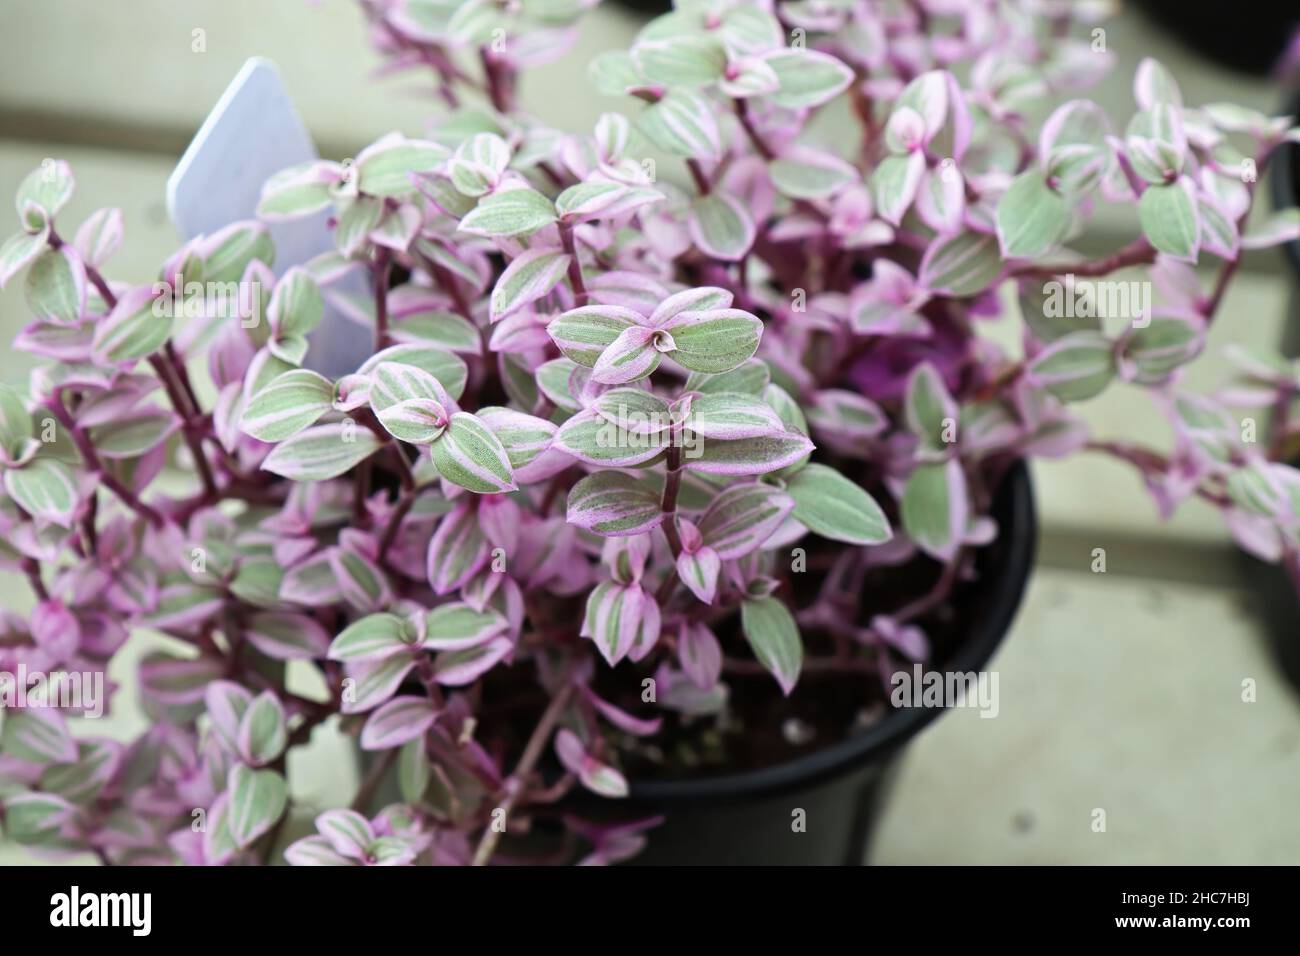 Top view of the pink and green leaves on a Callisia Stock Photo - Alamy